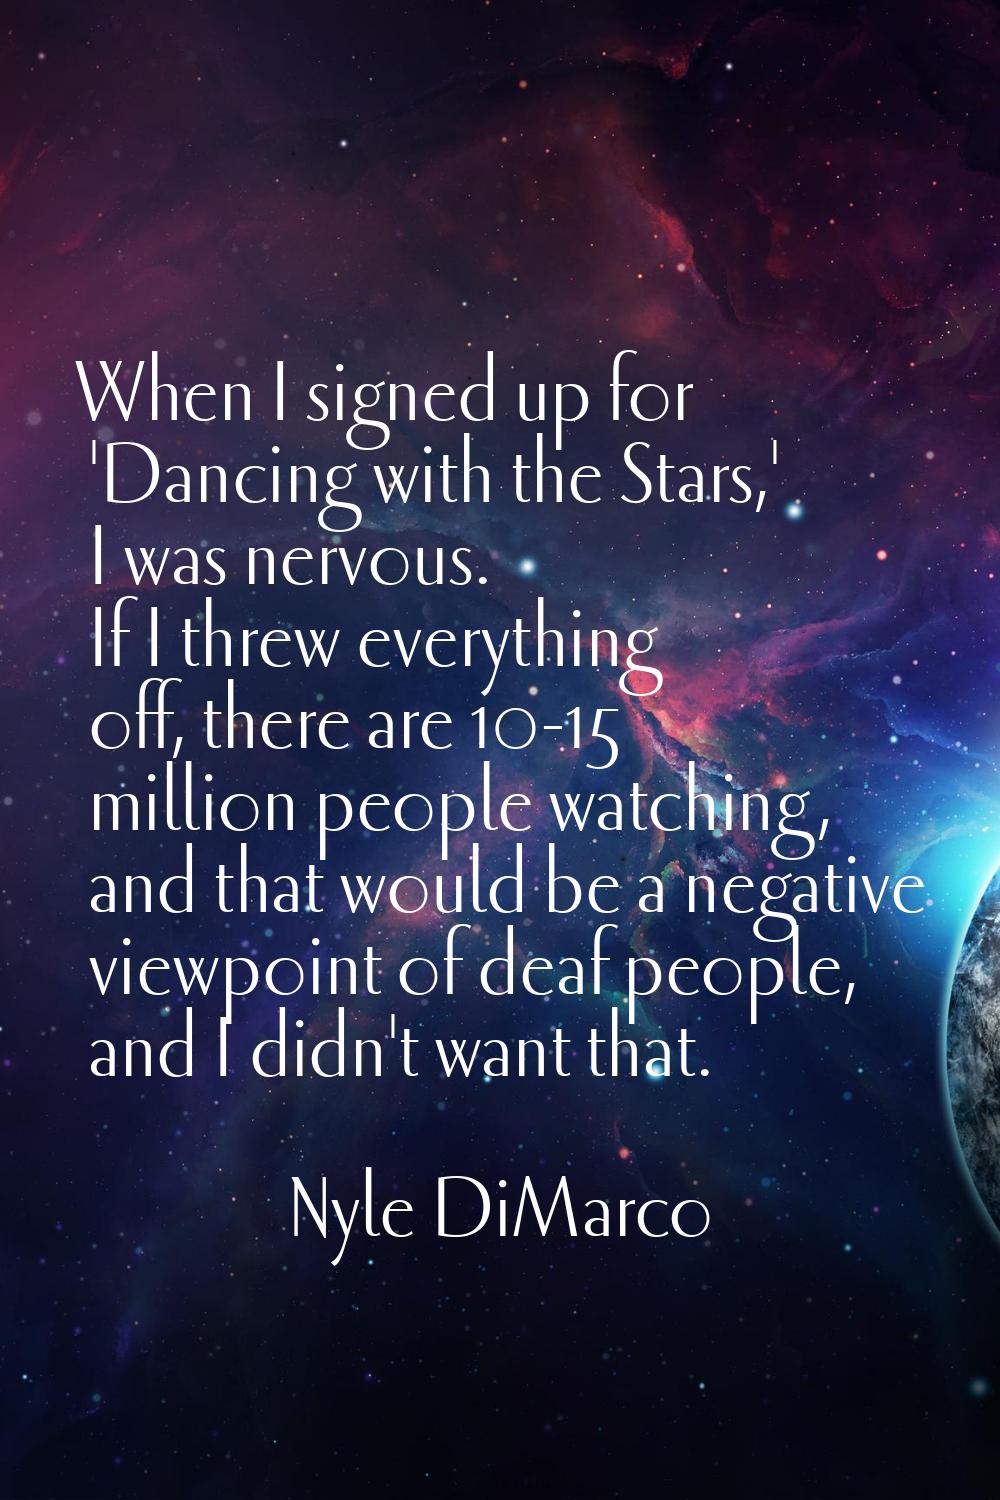 When I signed up for 'Dancing with the Stars,' I was nervous. If I threw everything off, there are 